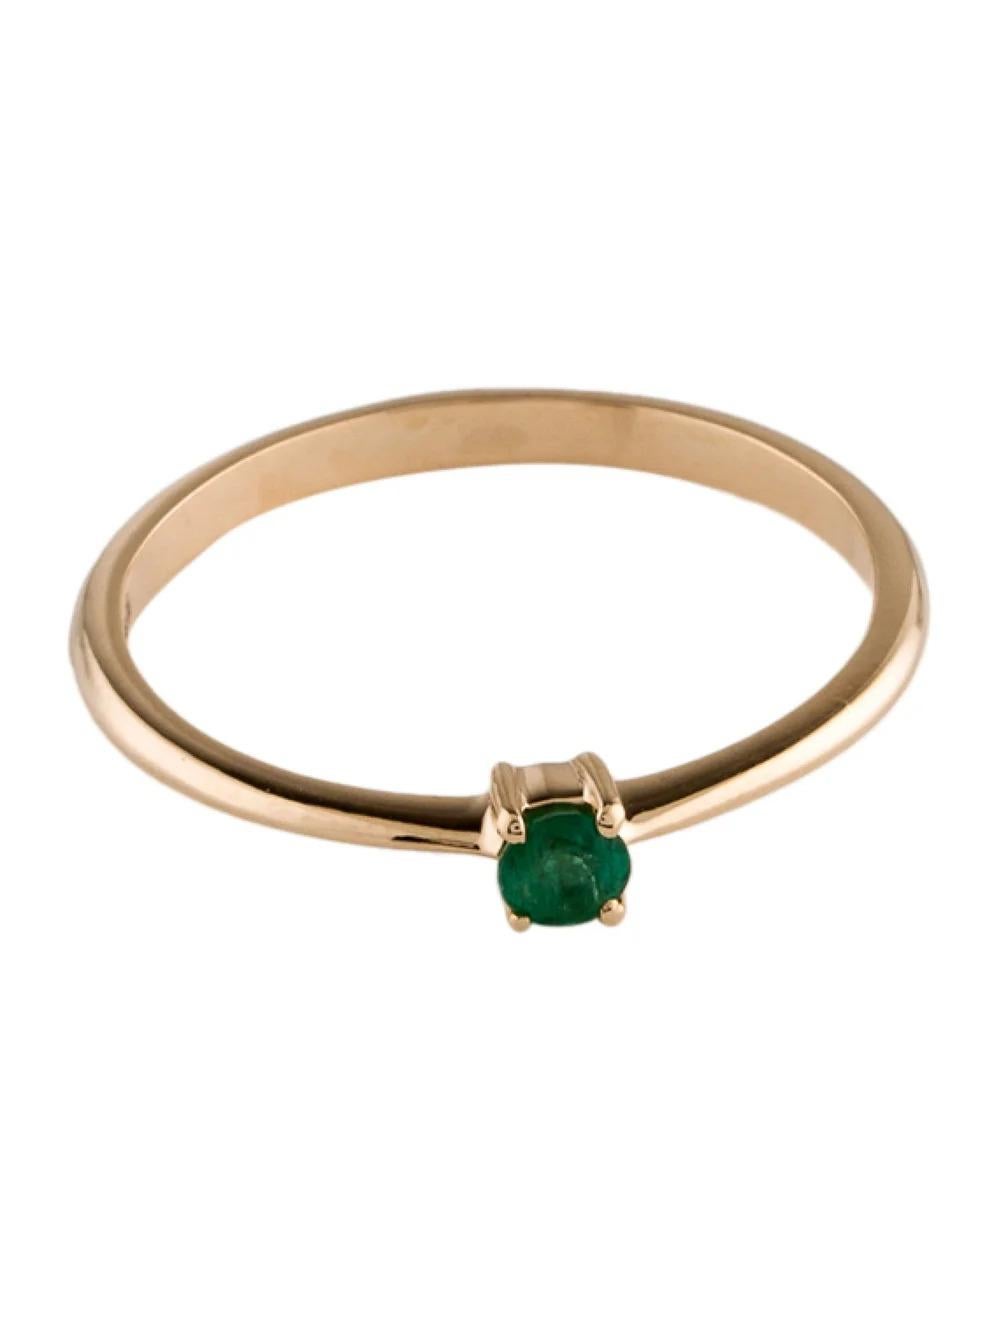 Round Cut 14K Emerald Band Ring Size 6.75 - Yellow Gold Vintage Estate Jewelry, Luxury For Sale